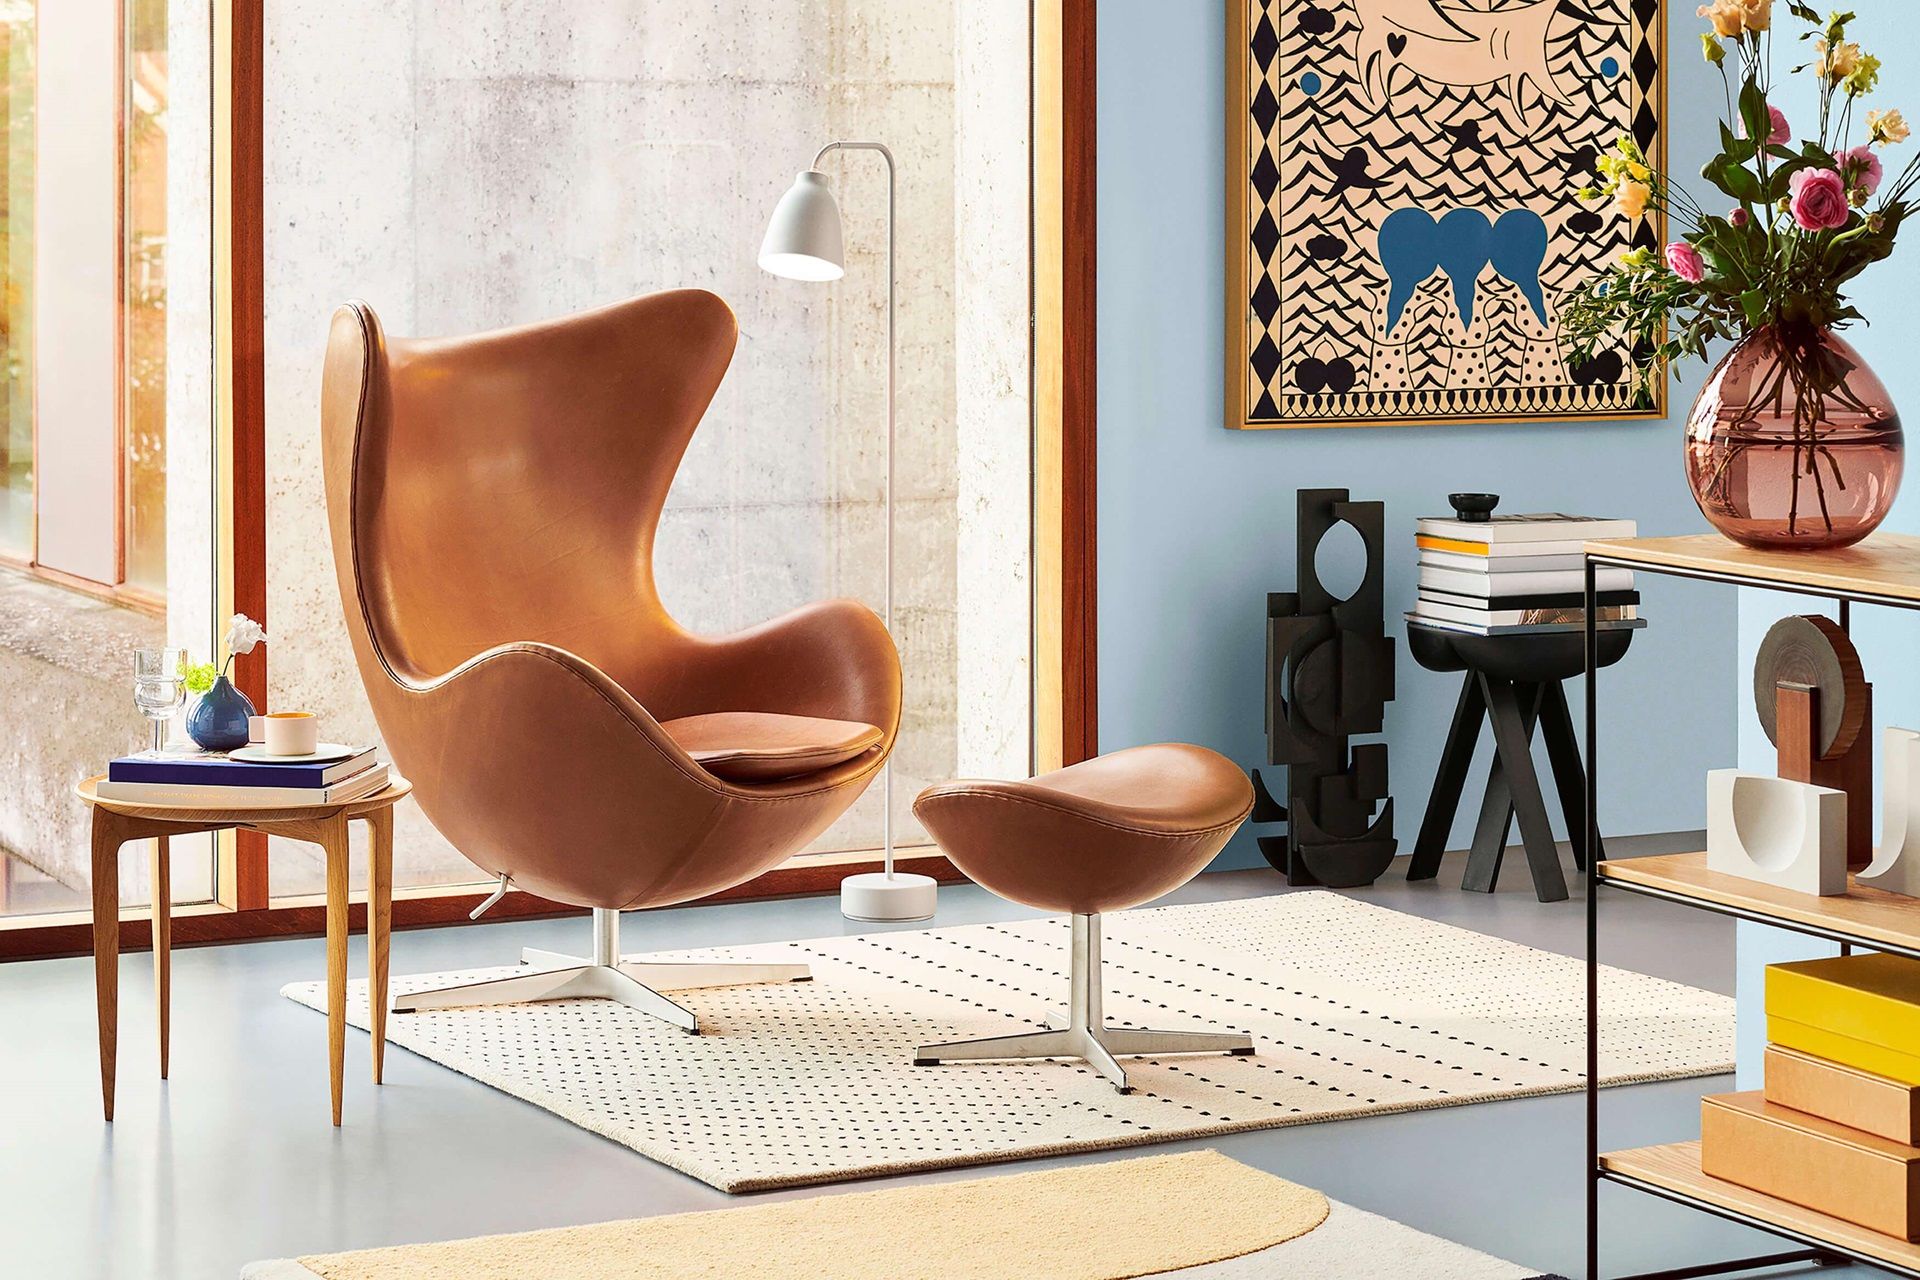 Learn All About Arne Jacobsen's Iconic Midcentury Egg Chair